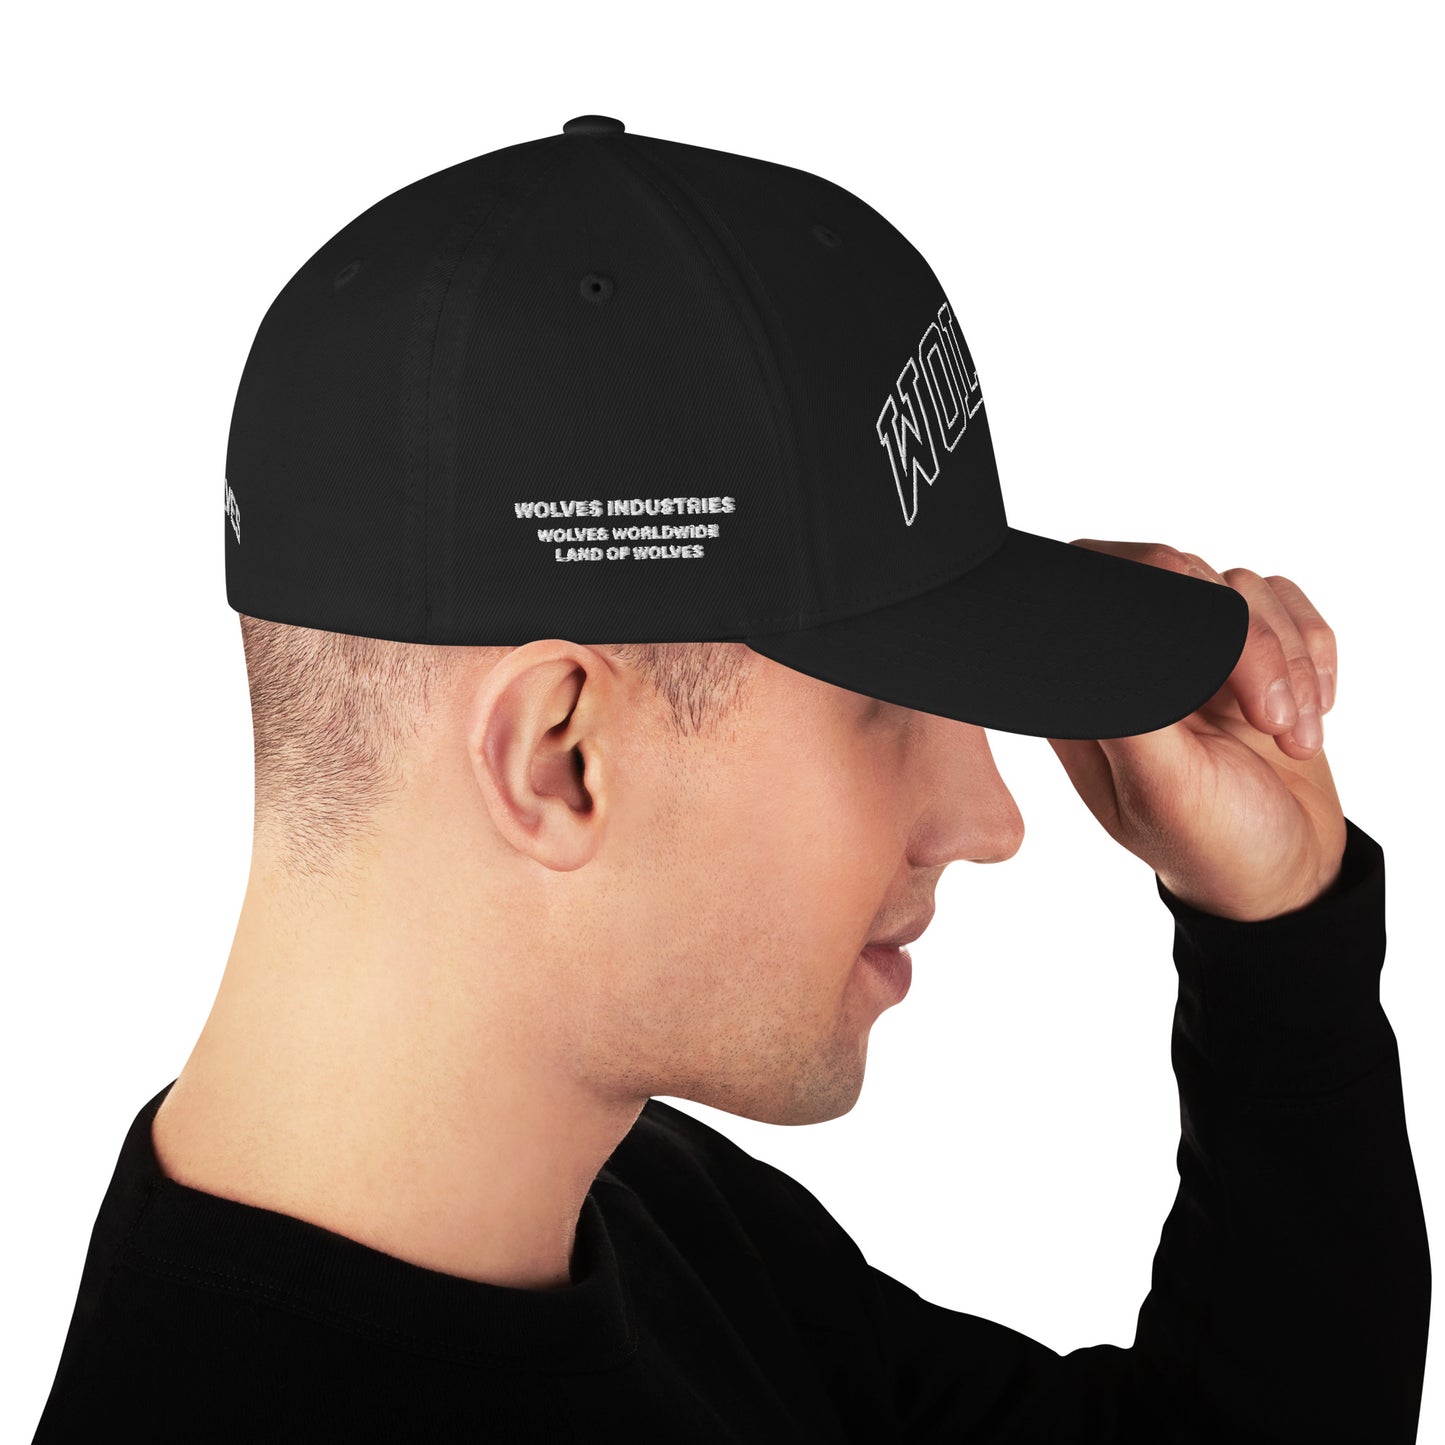 Wolves Industries HAW Structured Twill Cap